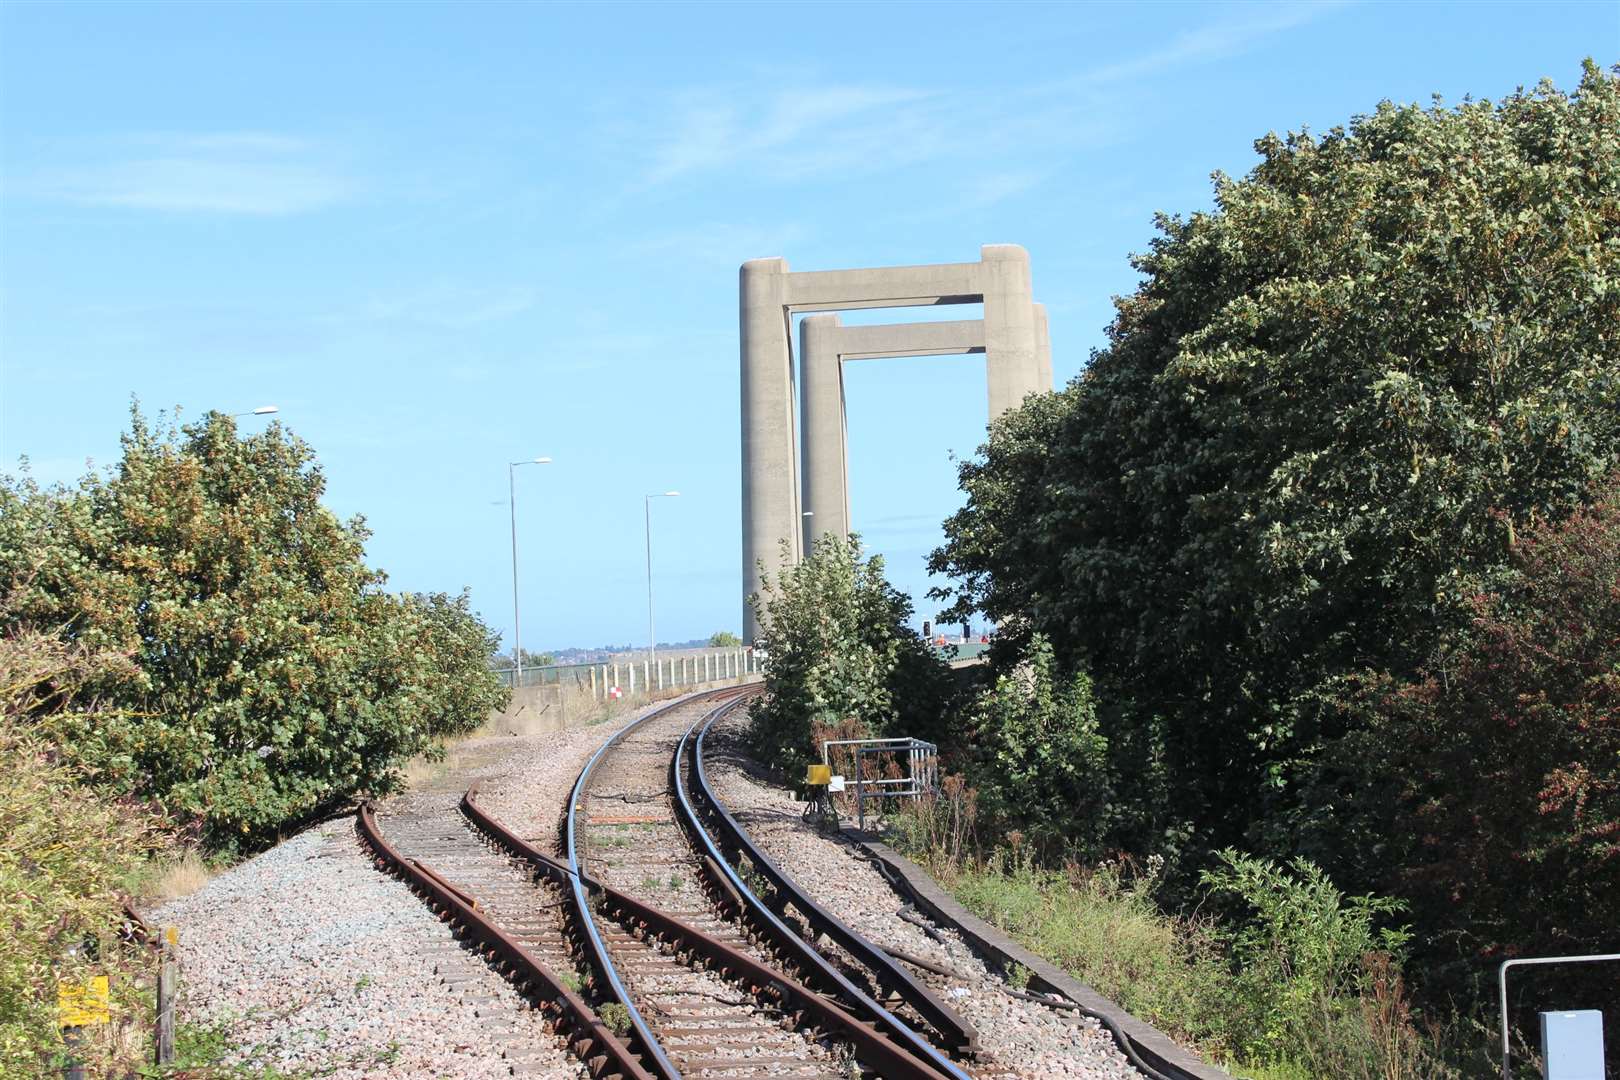 No trains or buses at Swale Halt by the Kingsferry Bridge at the Isle of Sheppey